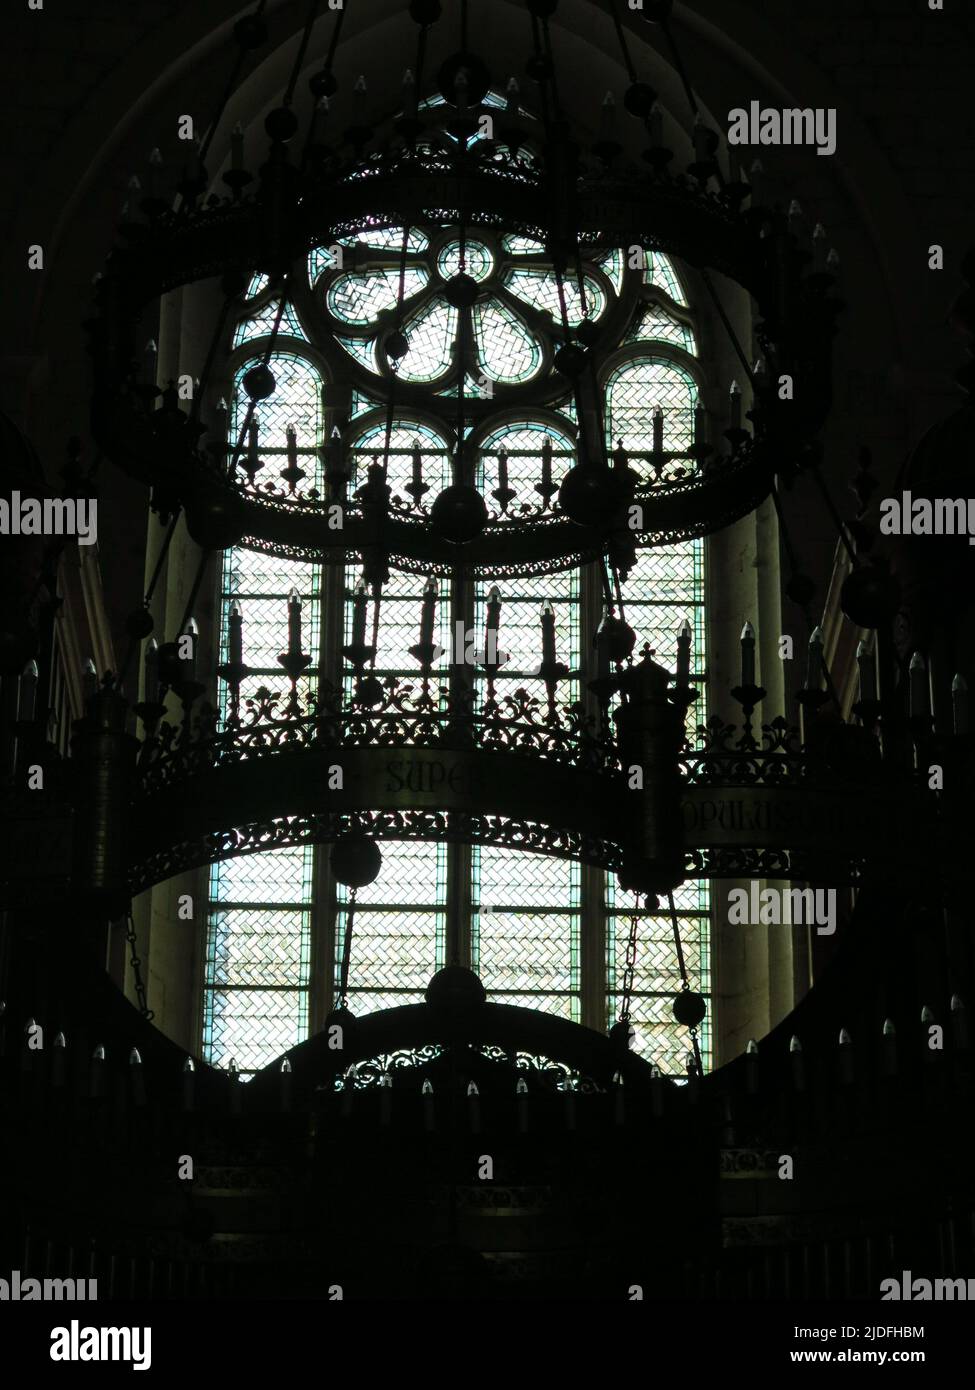 Abstract, black & white close-up of the ornate candelabra silhouetted against the stained glass windows of the Cathedral Saint Vincent in Viviers. Stock Photo